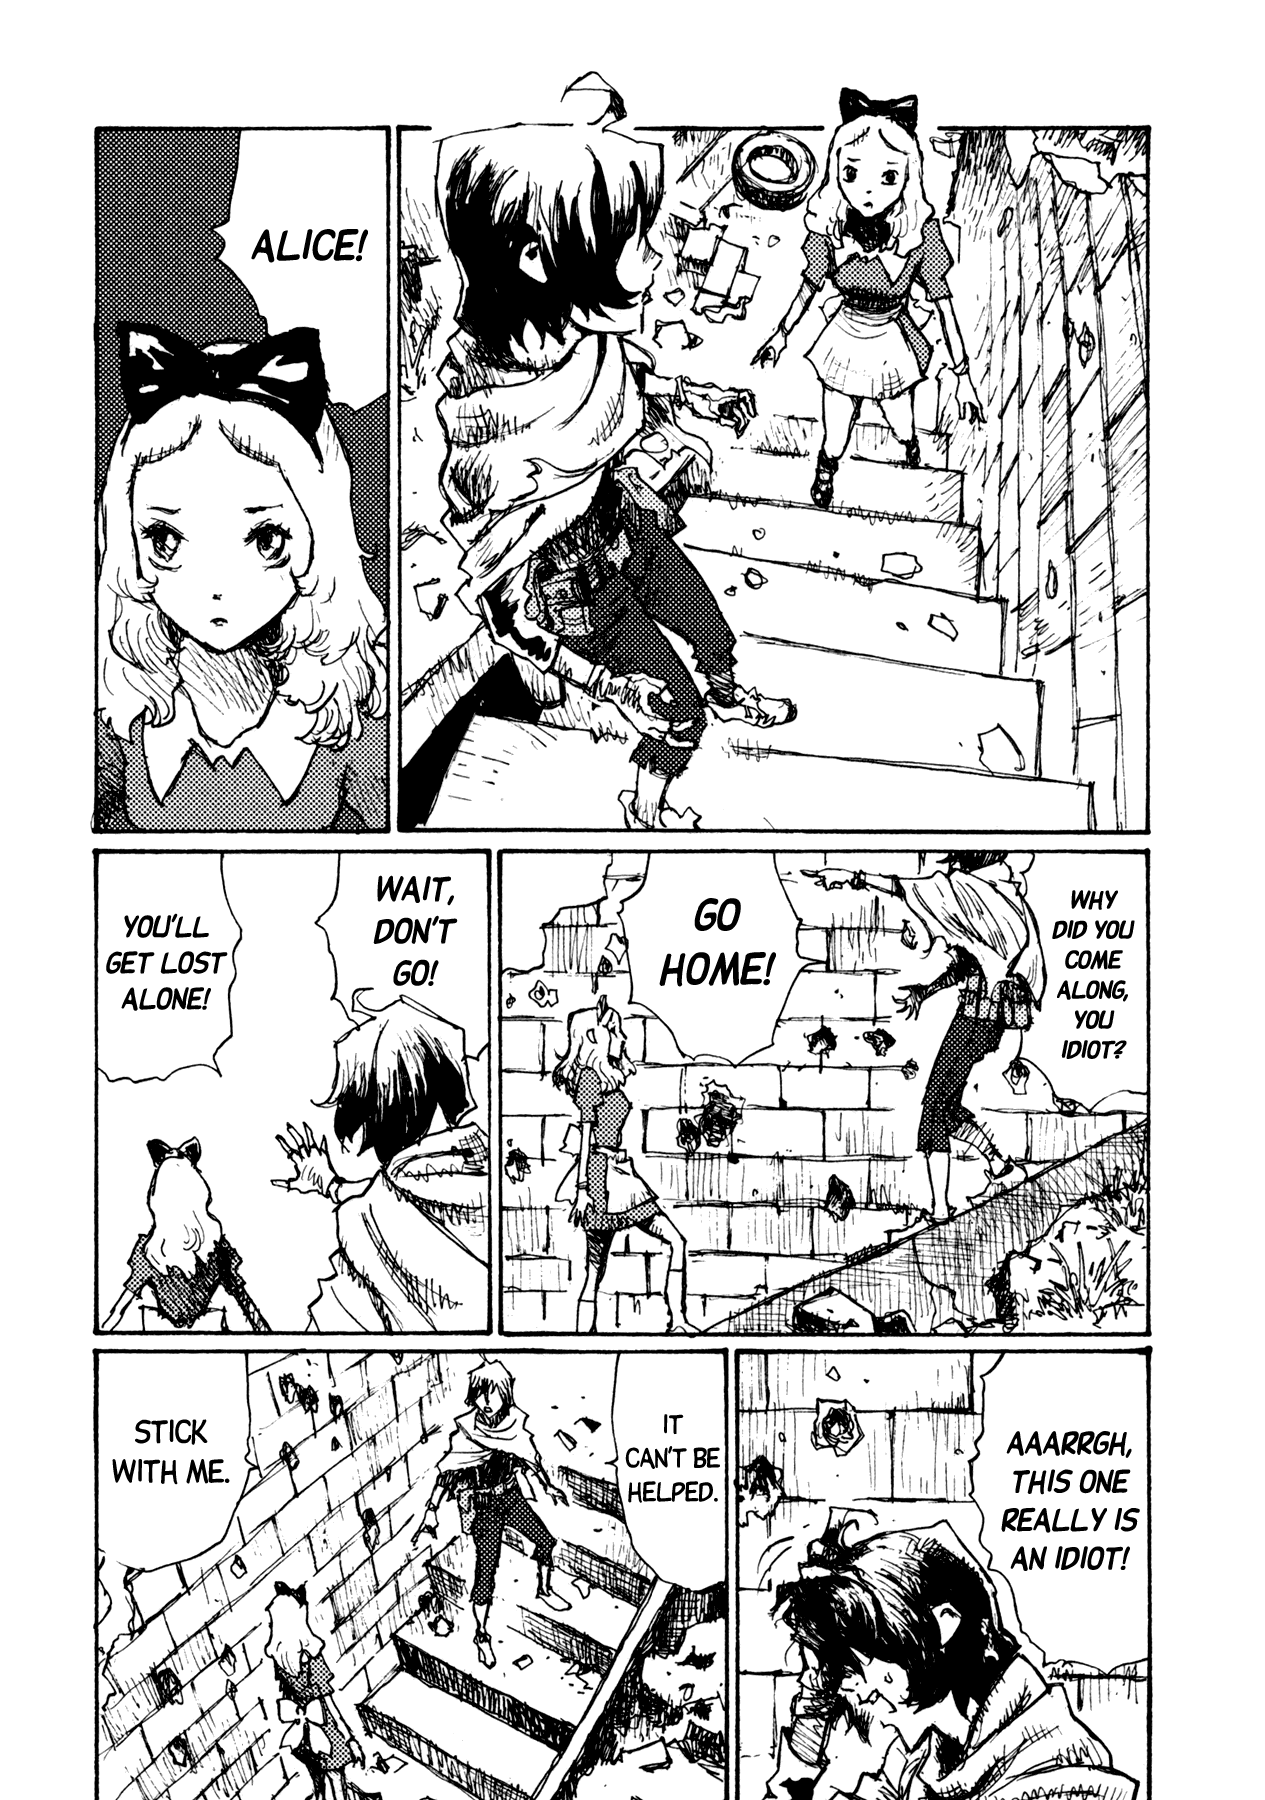 Alice in Hell Vol.1 Ch.3